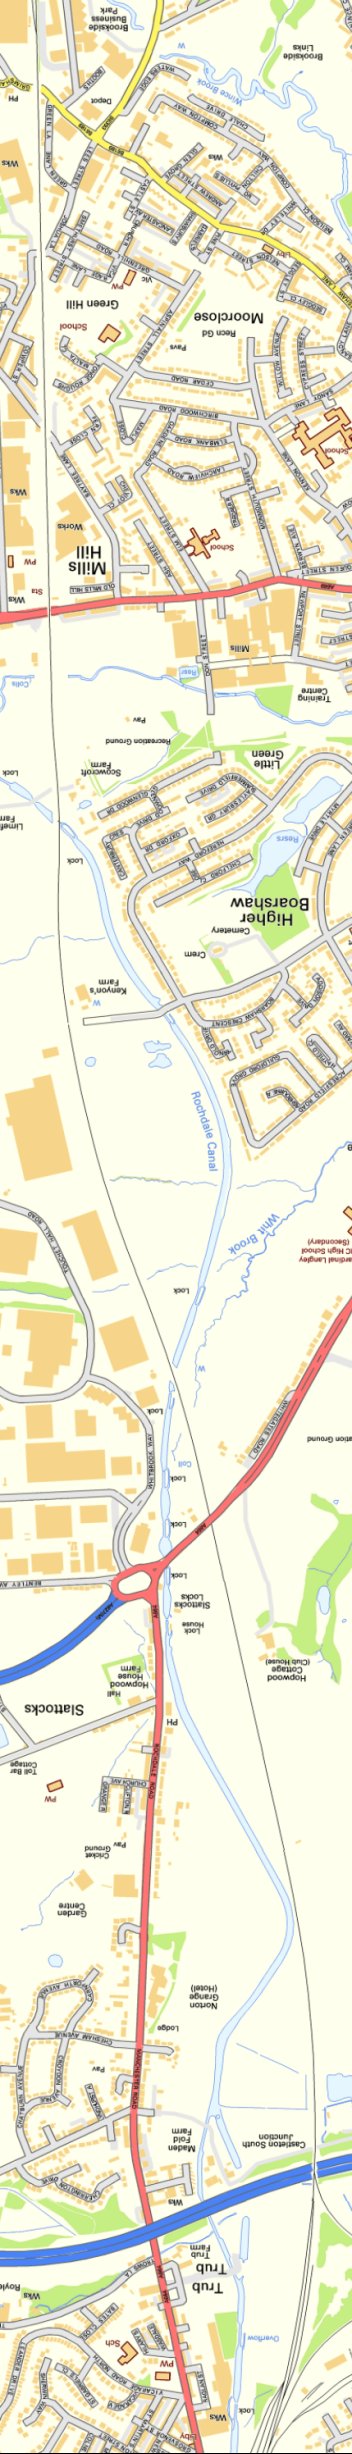 Section from Ordnance Survey OpenSource mapping 2013 showing L&YR railway line from Baytree Lane bridge to Castleton South JUnction (M62 bridge)